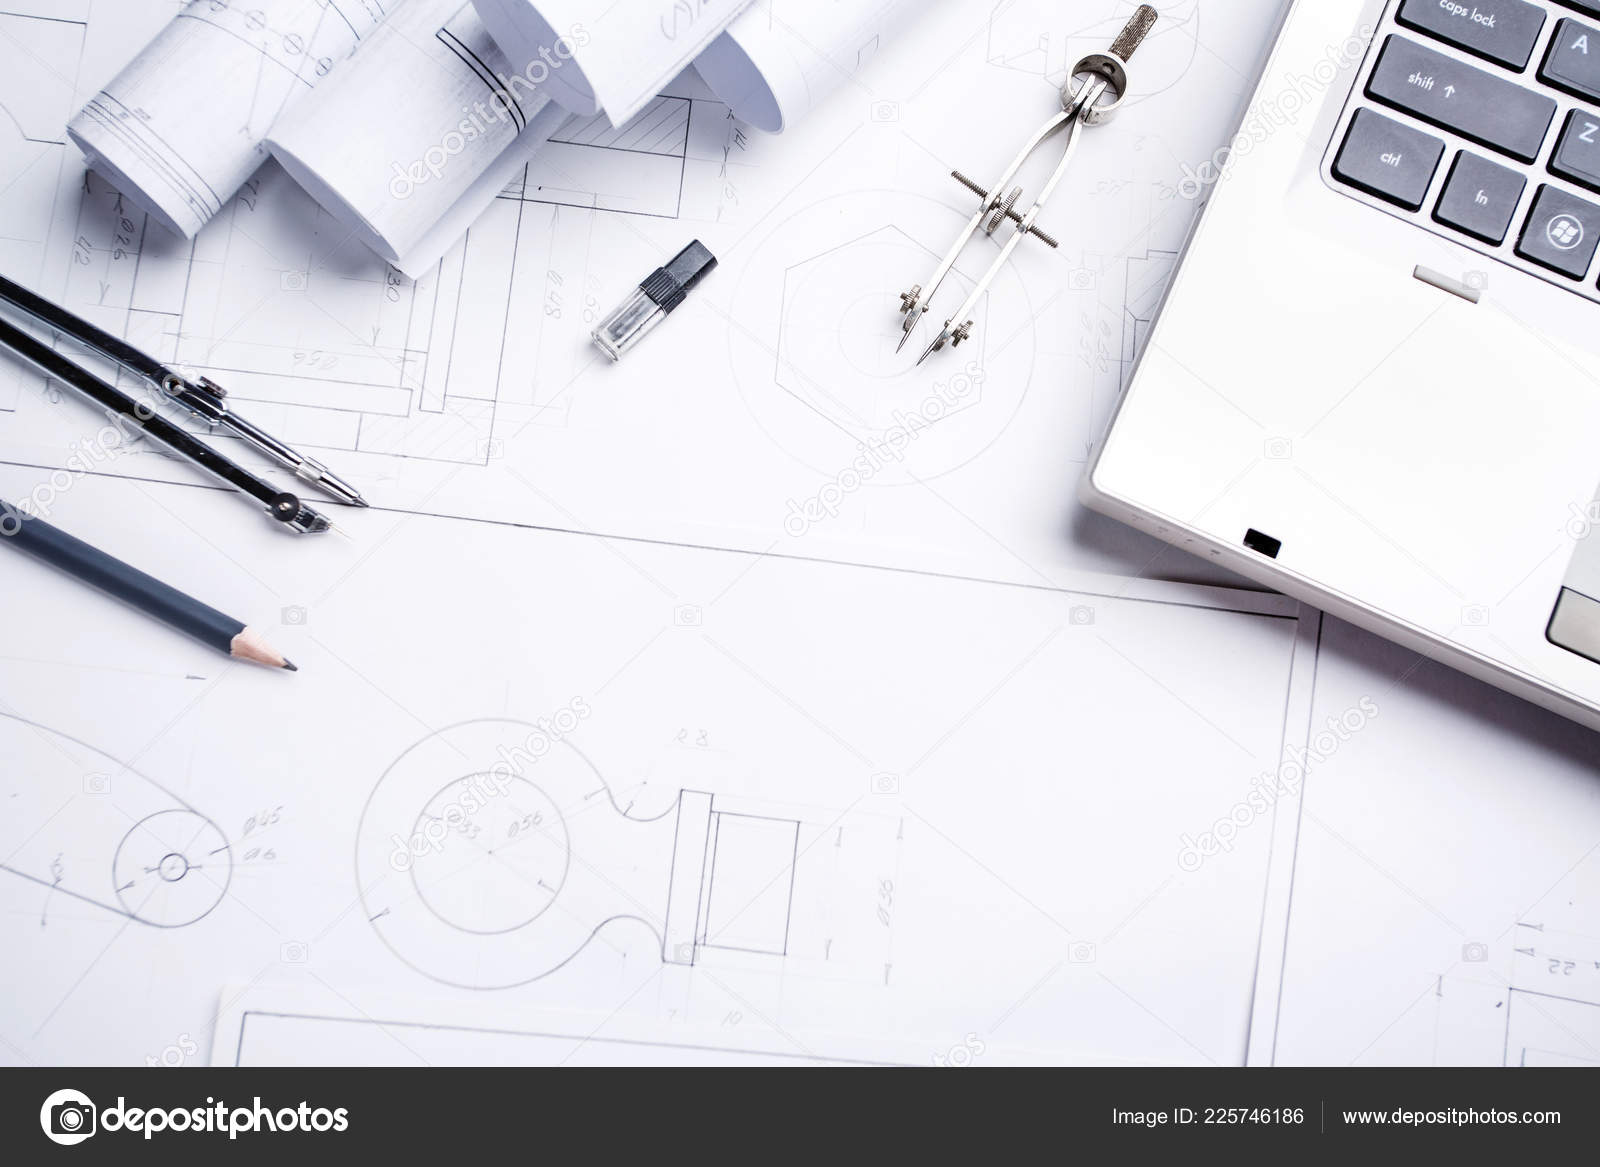 Keyboard, Pencil and Sticker Stock Image - Image of computer, business:  39784291